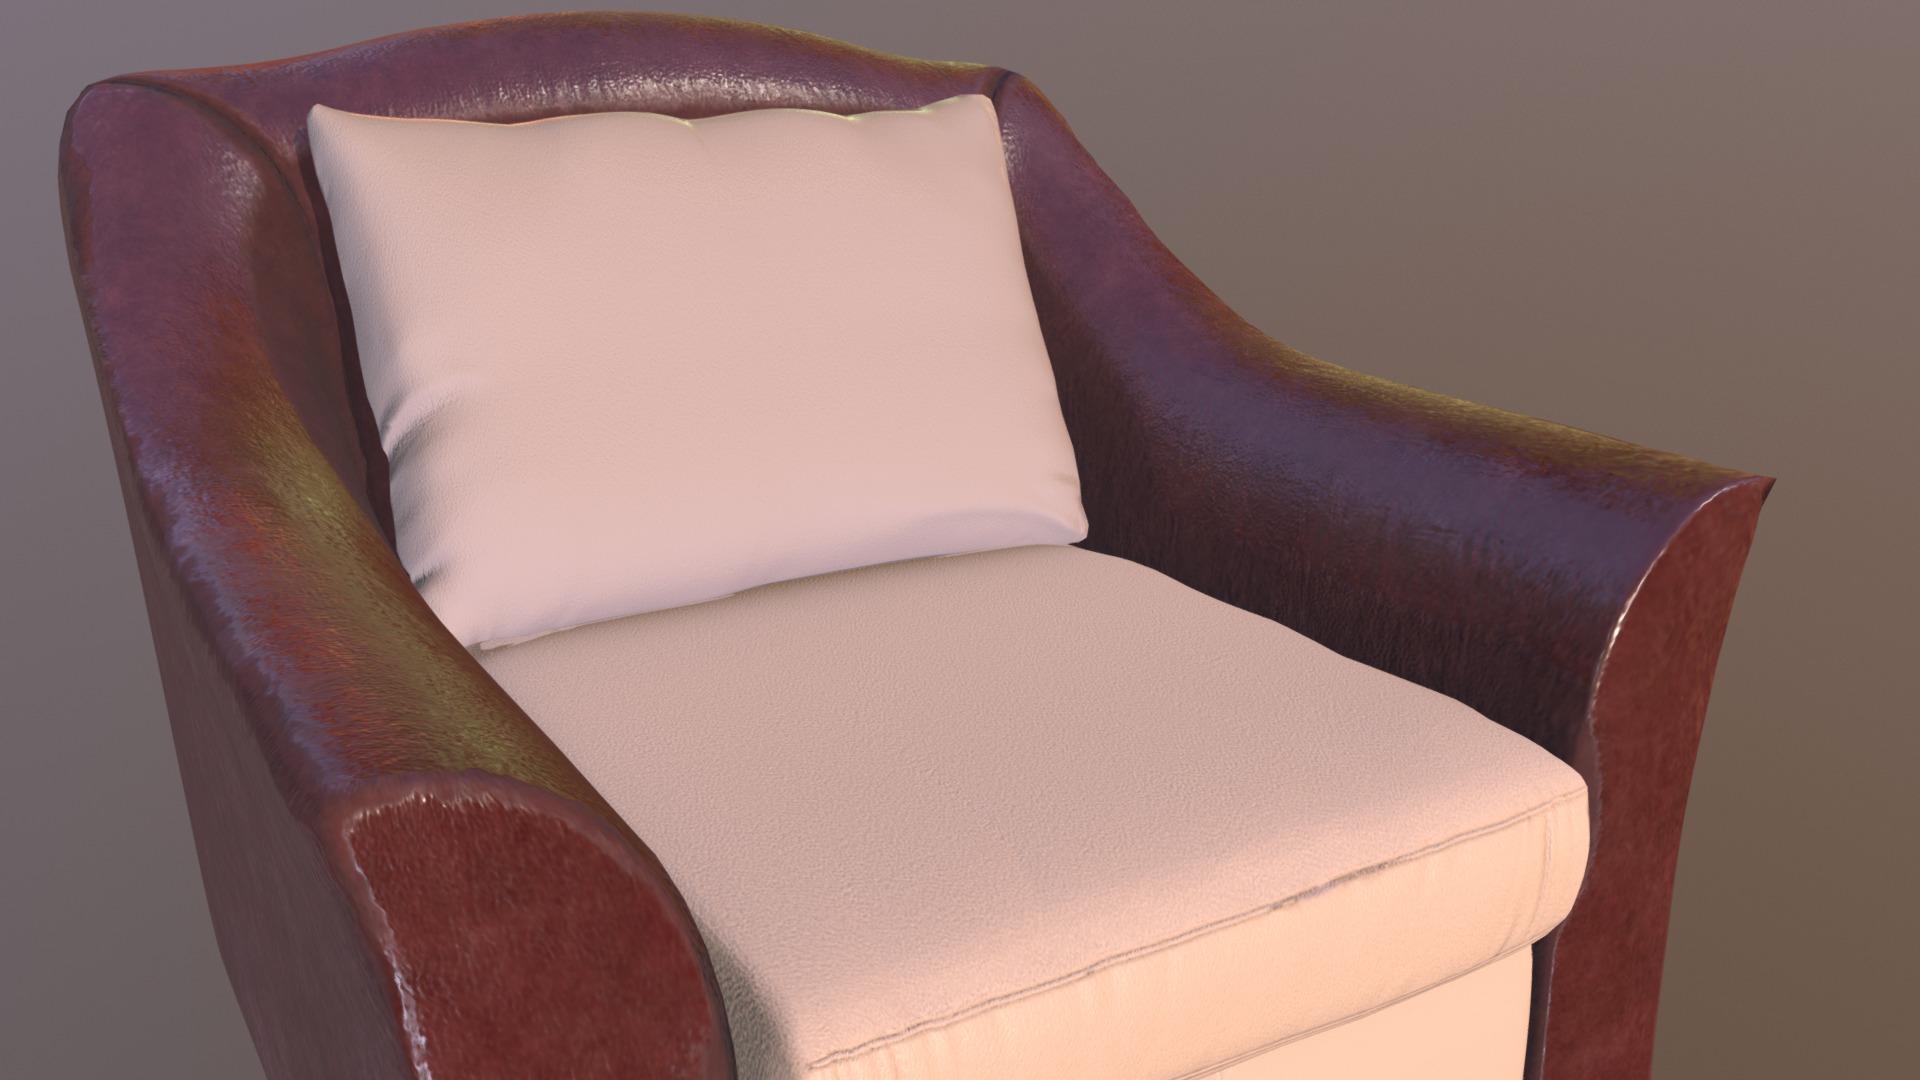 3D model ArmChair - This is a 3D model of the ArmChair. The 3D model is about a chair with a pillow.